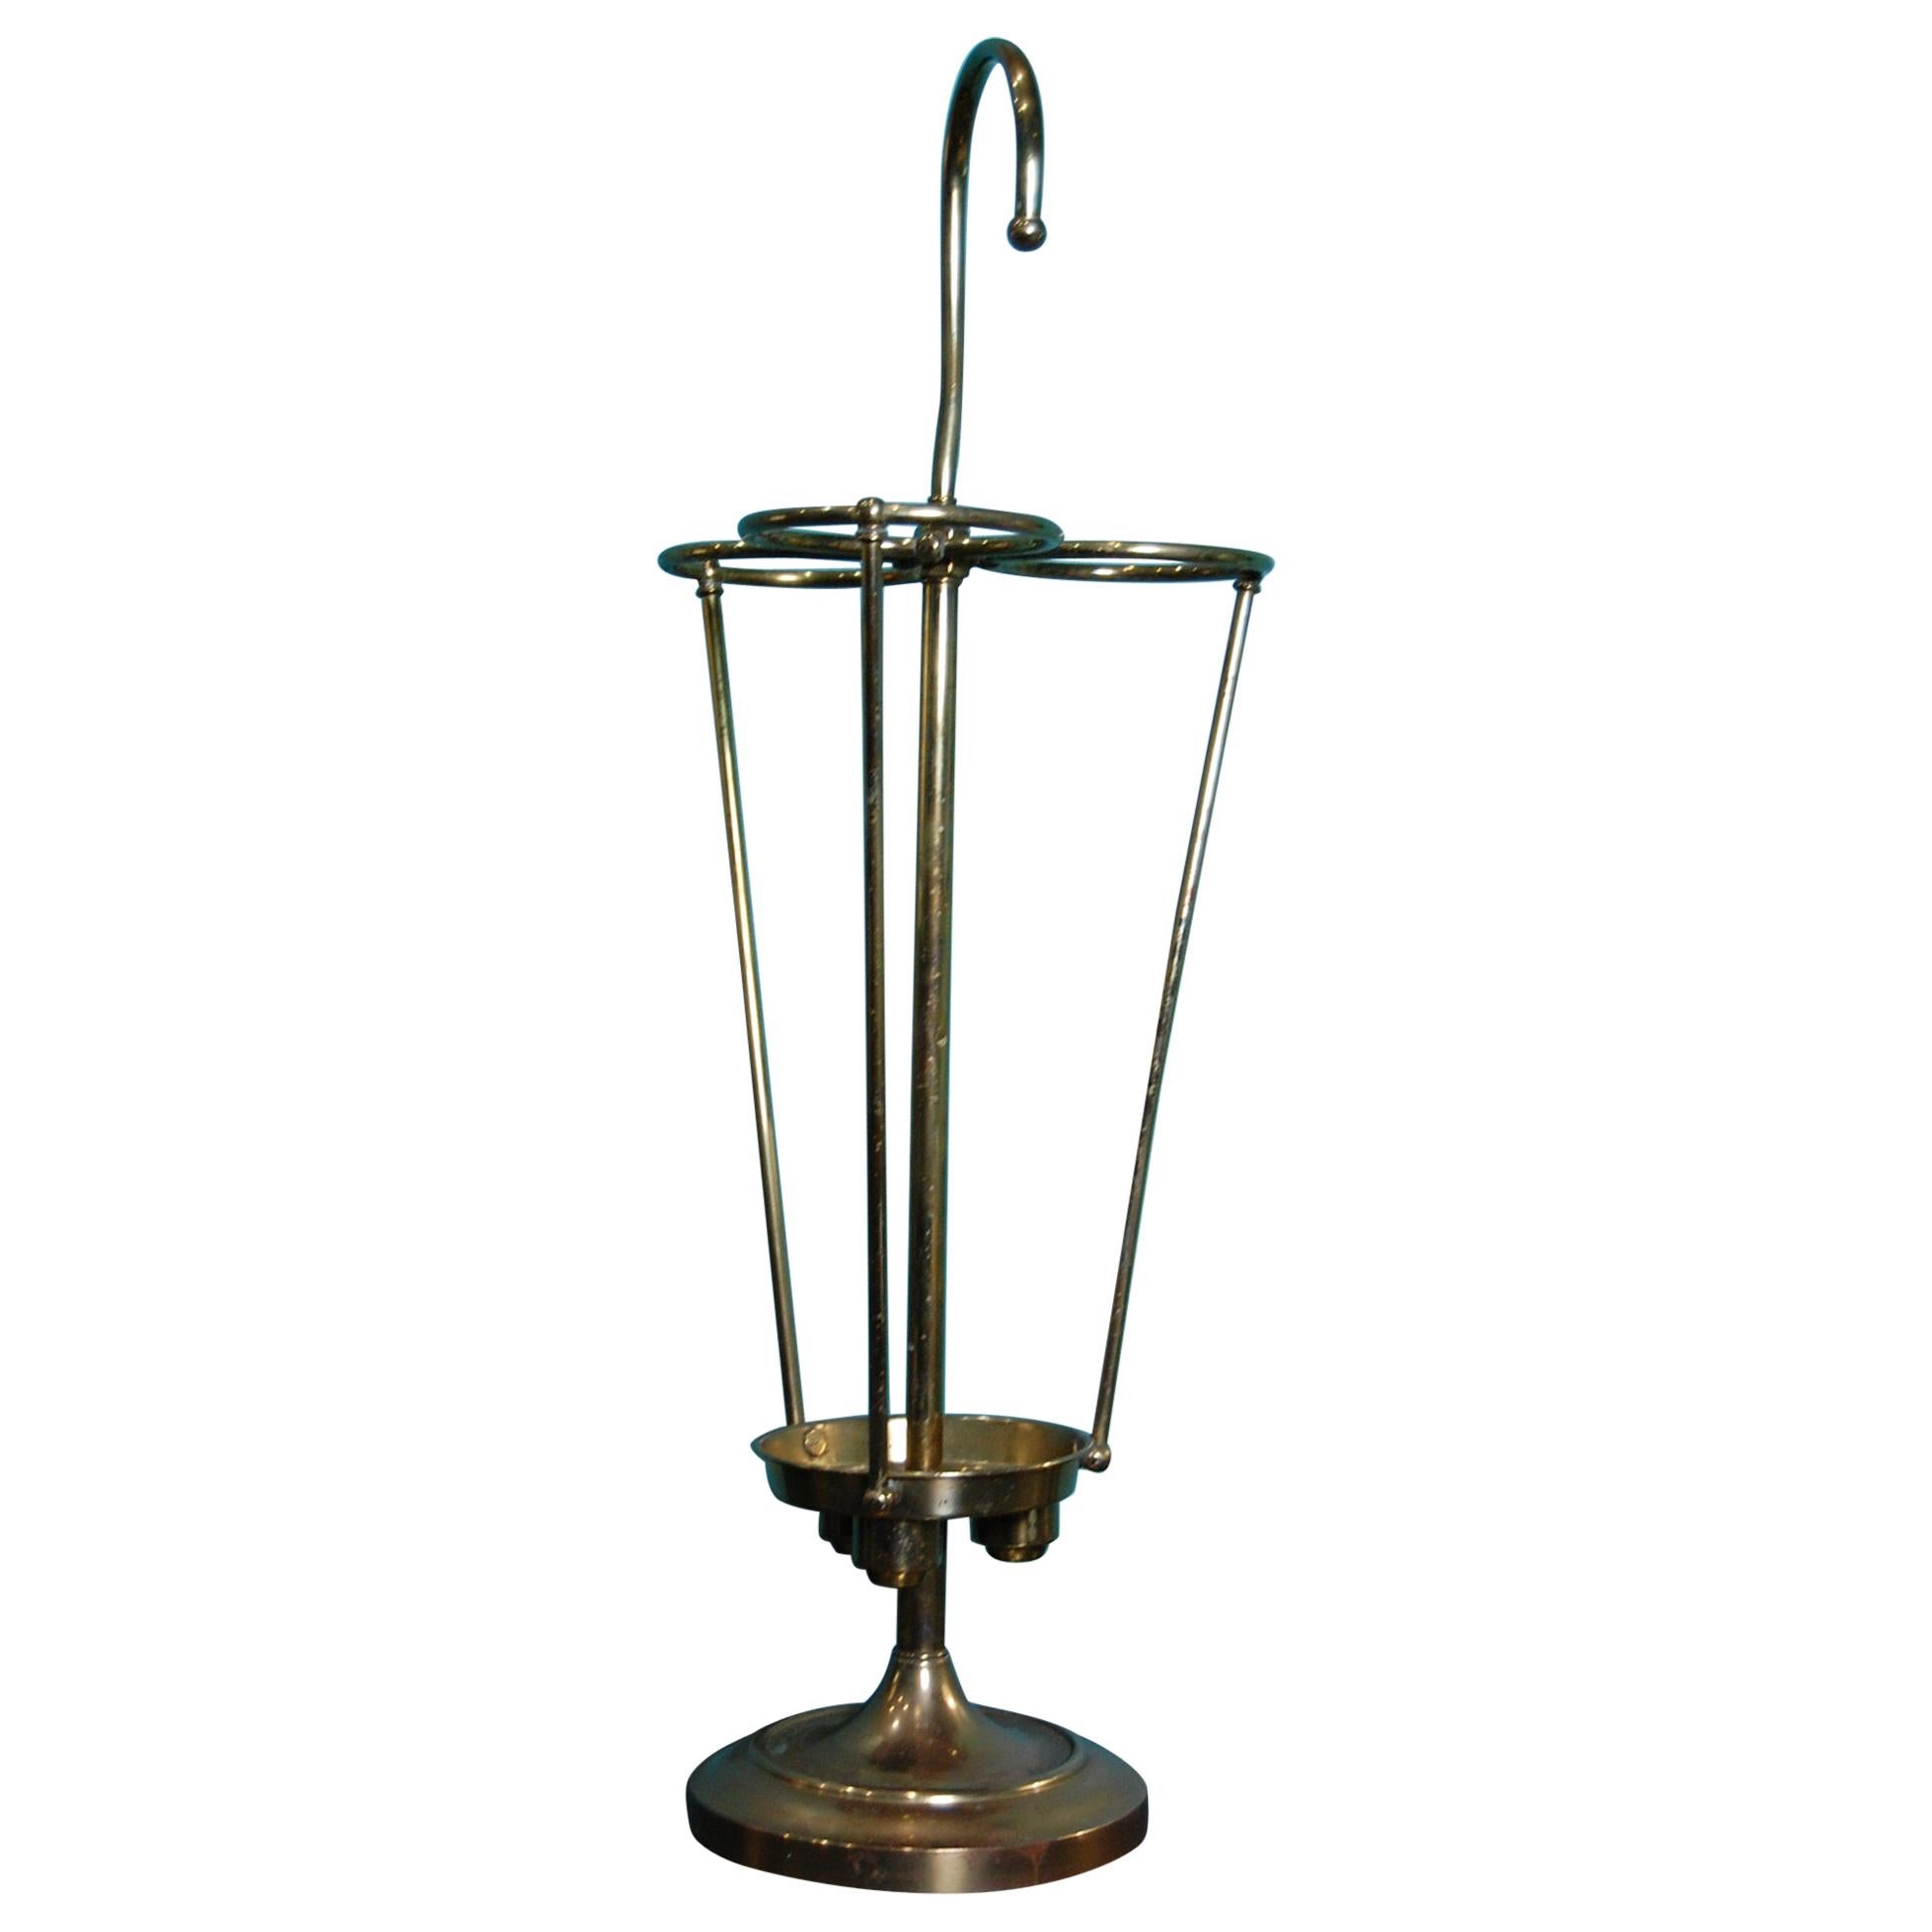 Mid-20th Century Brass Umbrella Stand by Herco Art Manufacturing Company For Sale